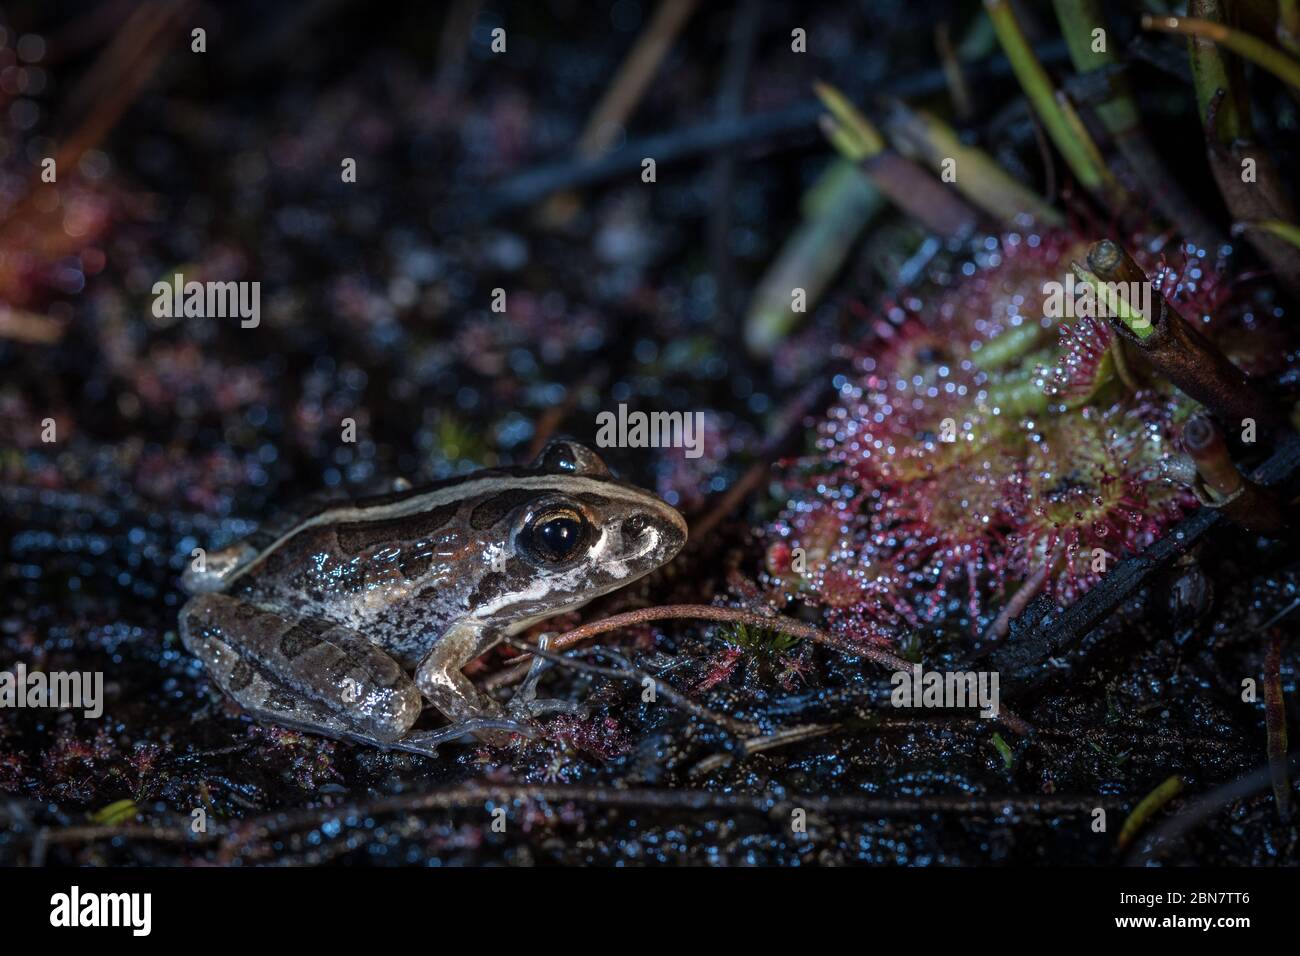 The habitat inside Kenilworth Racecourse Conservation Area, Cape Town, is home to many species including Clicking Stream Frog, Strongylopus grayii. Stock Photo